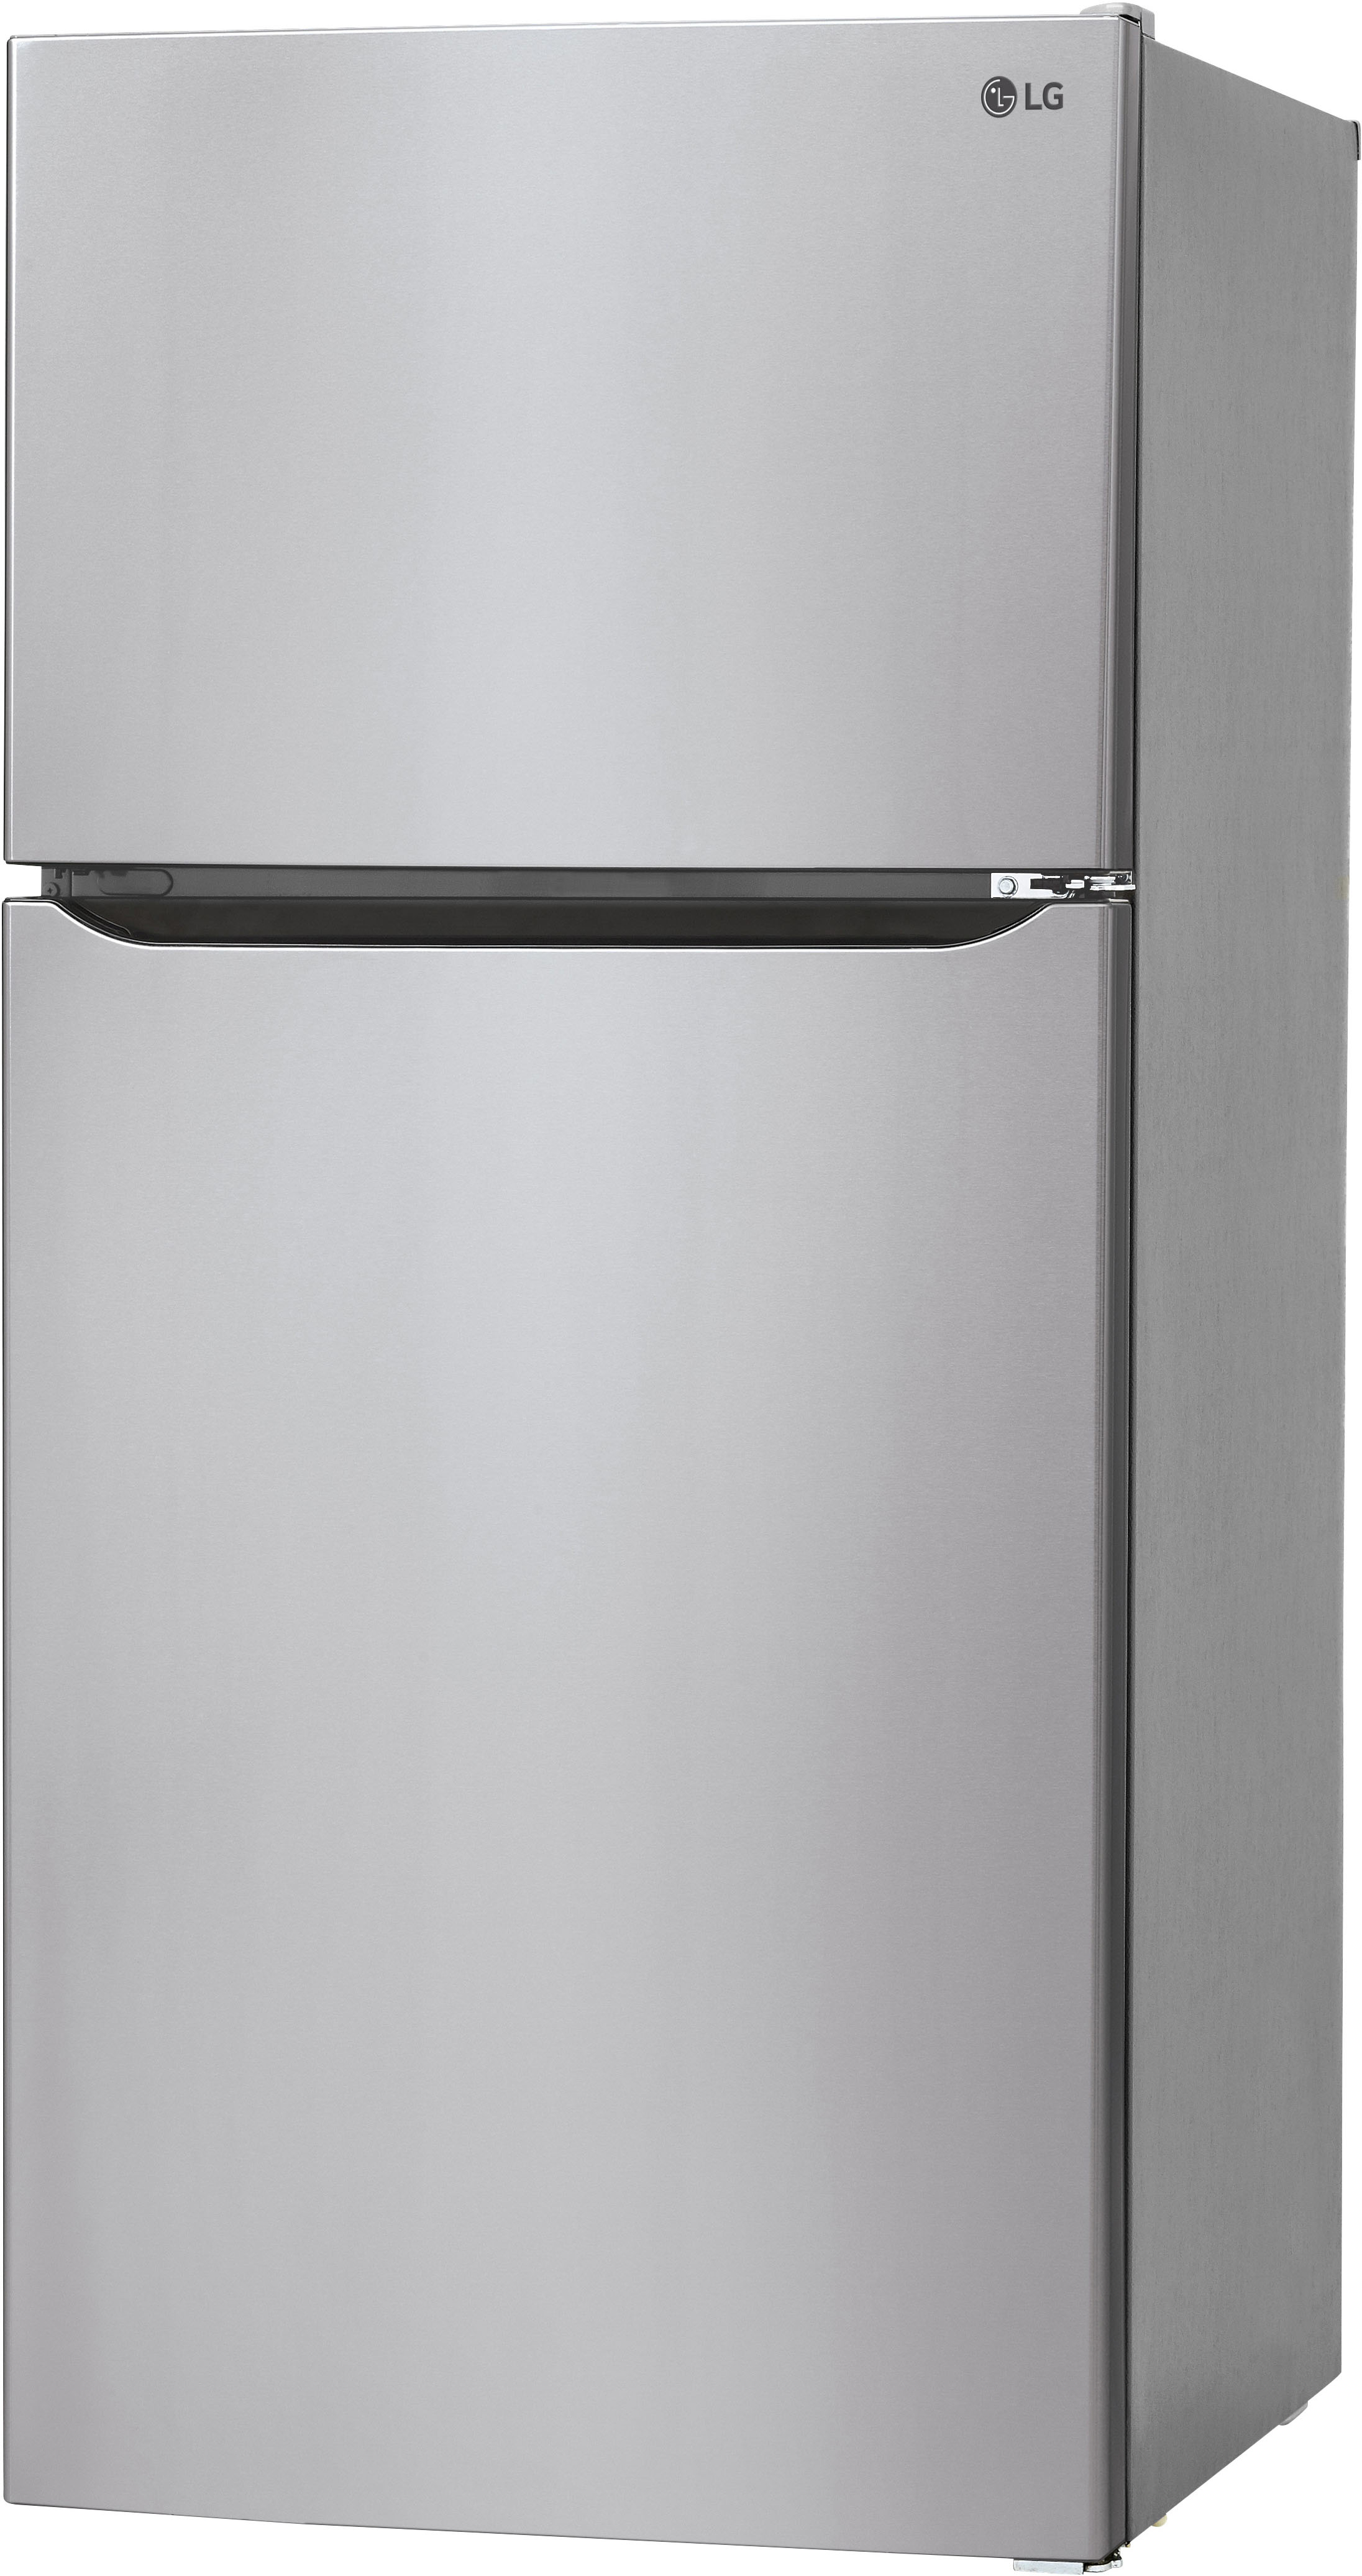 Angle View: Samsung - 15.6 cu. ft. Top Freezer Refrigerator with All-Around Cooling - Stainless steel